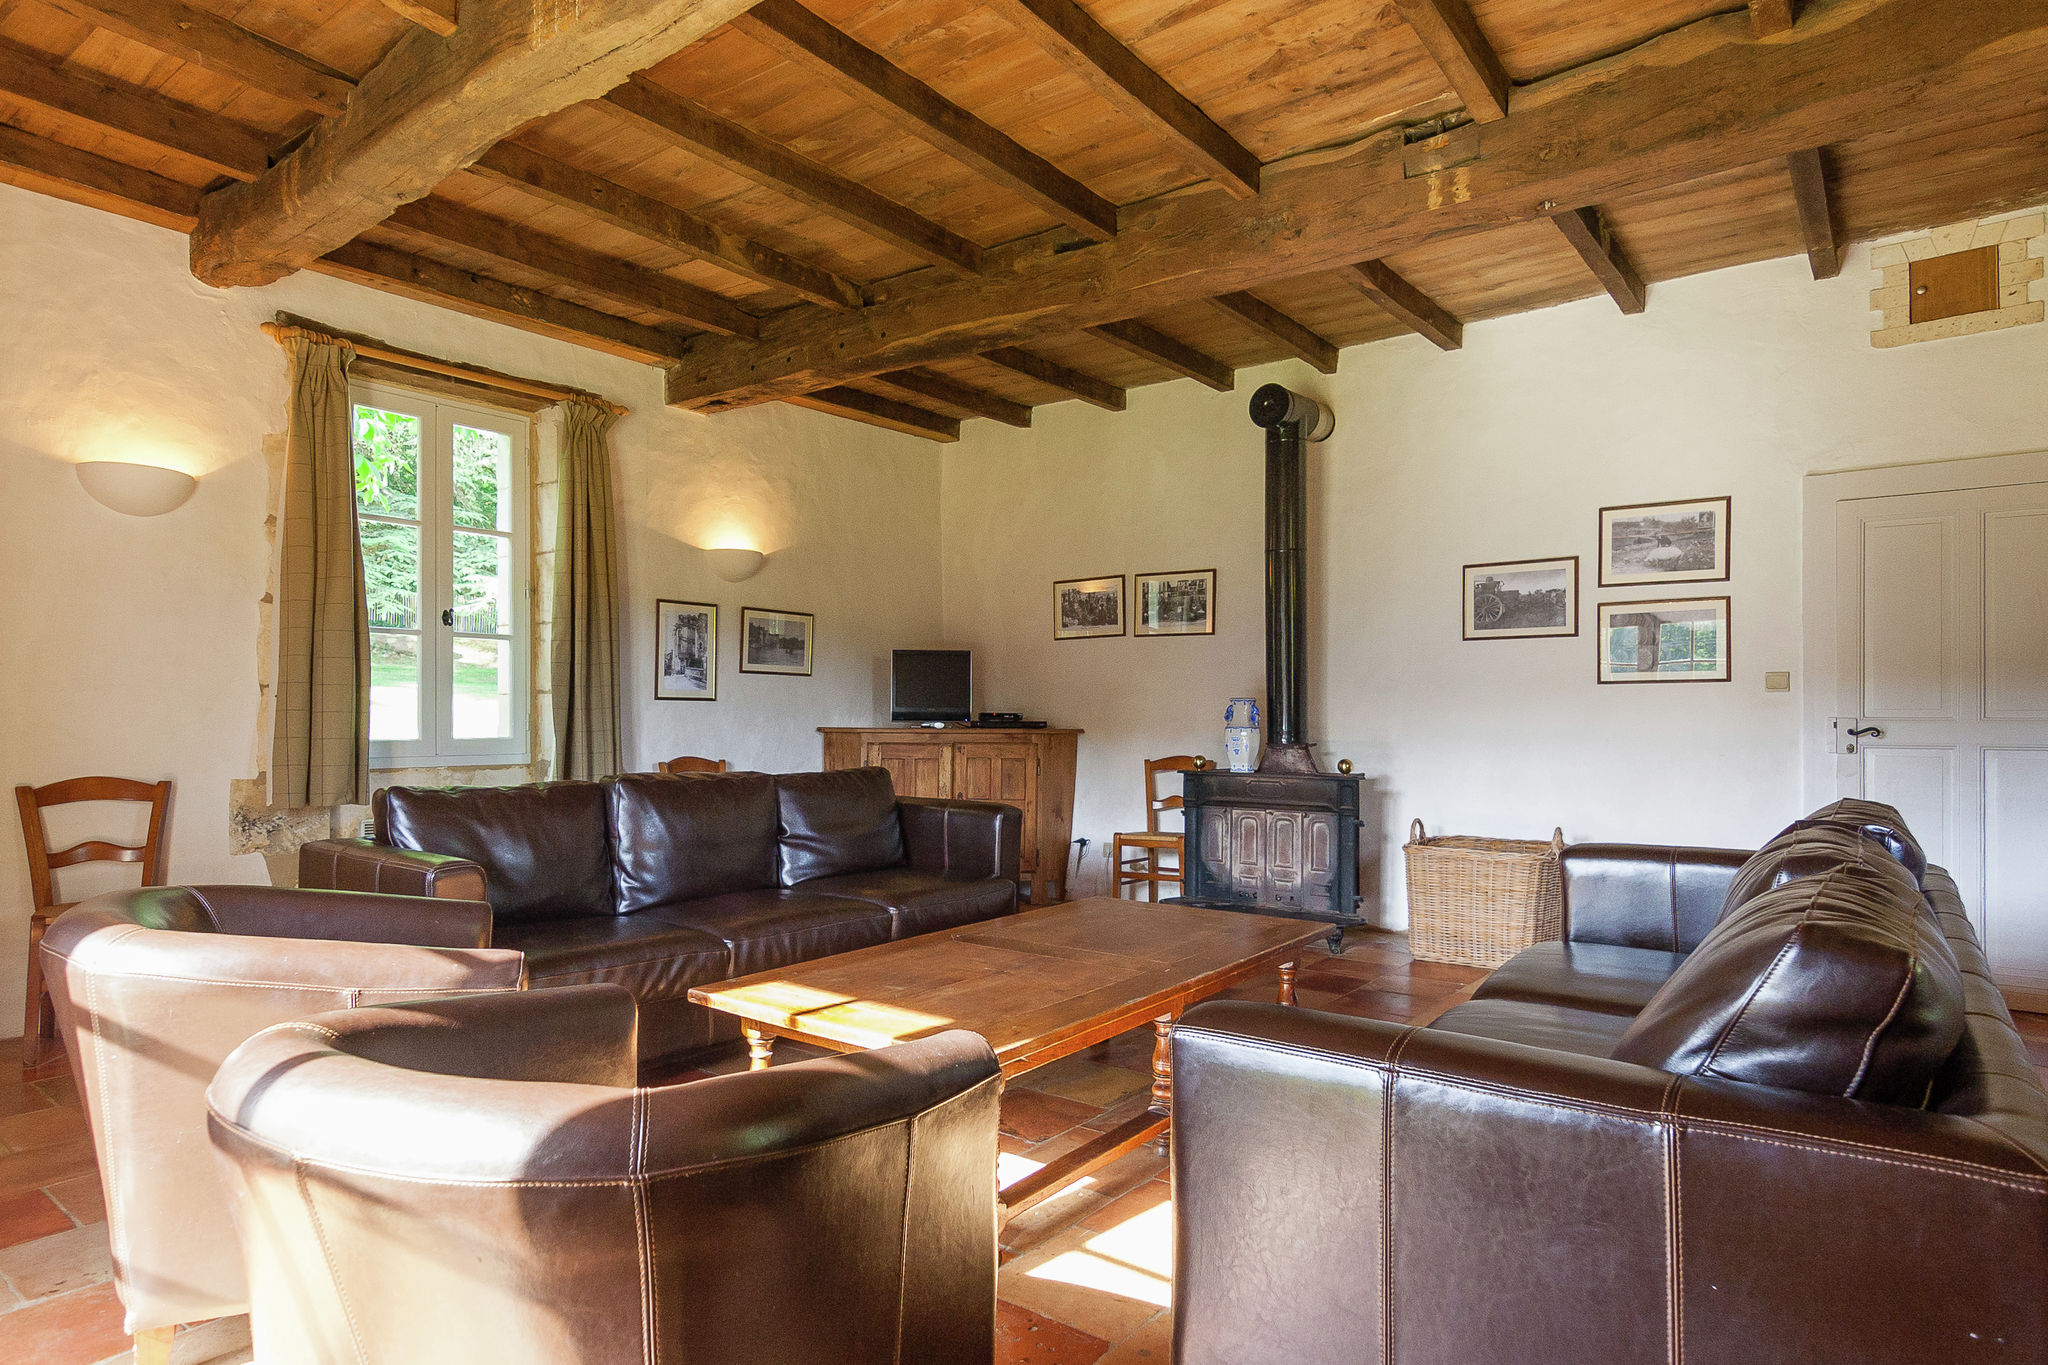 Impressive, restored farmhouse with private pool, surrounded by woods.

